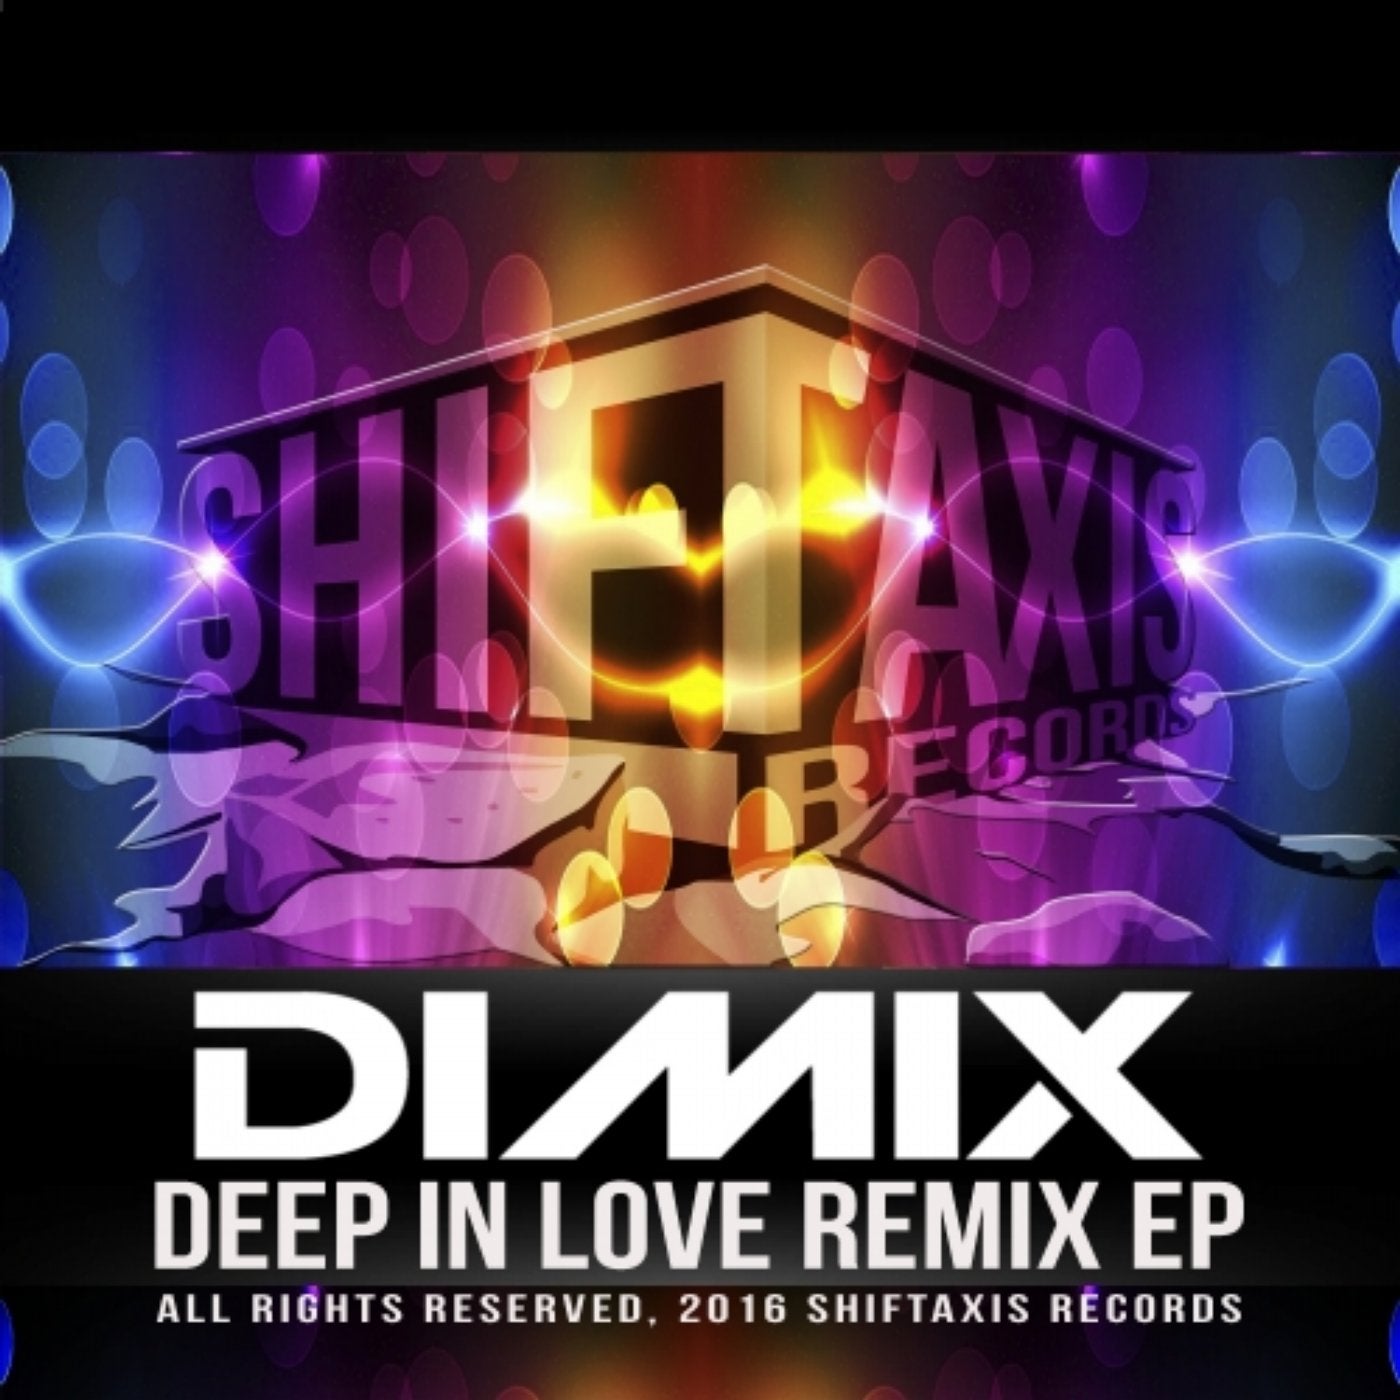 Deep In Love Remix EP